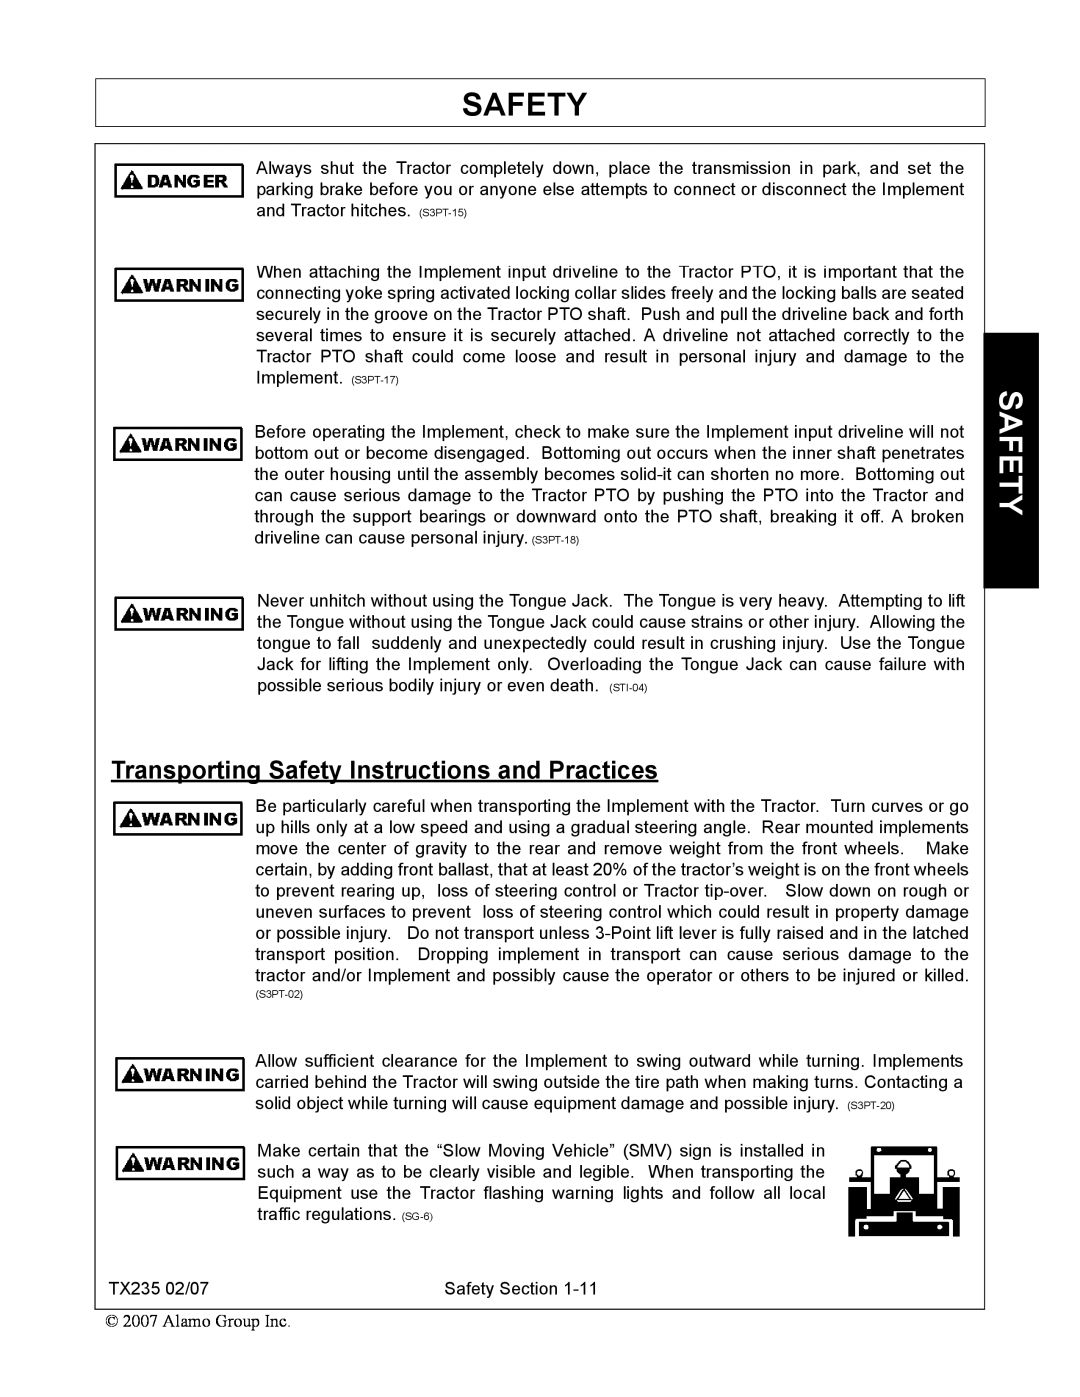 Alamo TX235 manual Transporting Safety Instructions and Practices, S3PT-02 